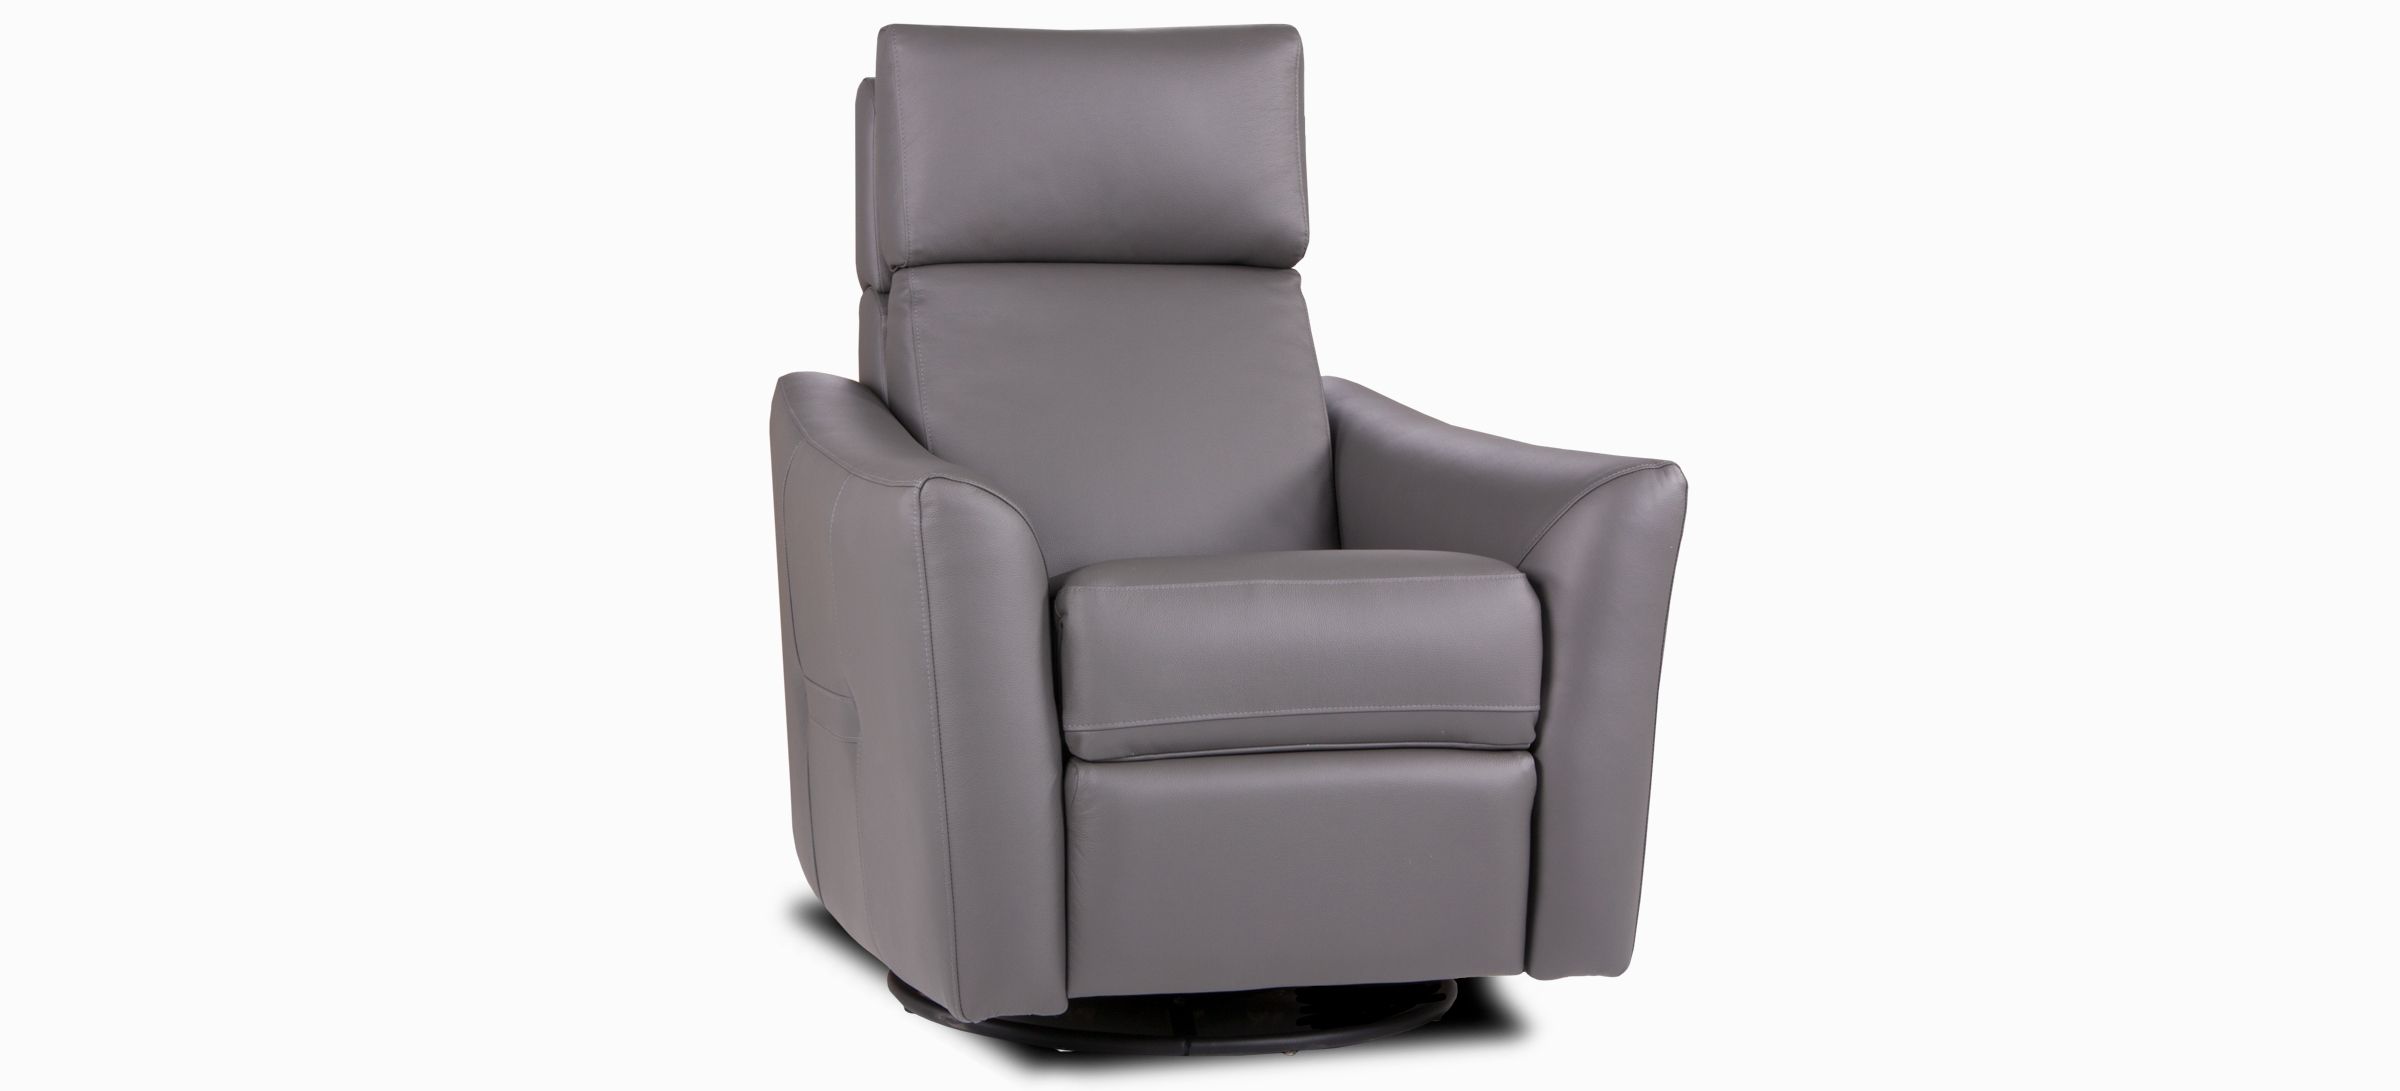 Newest Clay Side Chairs Pertaining To Swivel And Rocking Motion Chair Julianne – Contemporary Style (View 9 of 20)